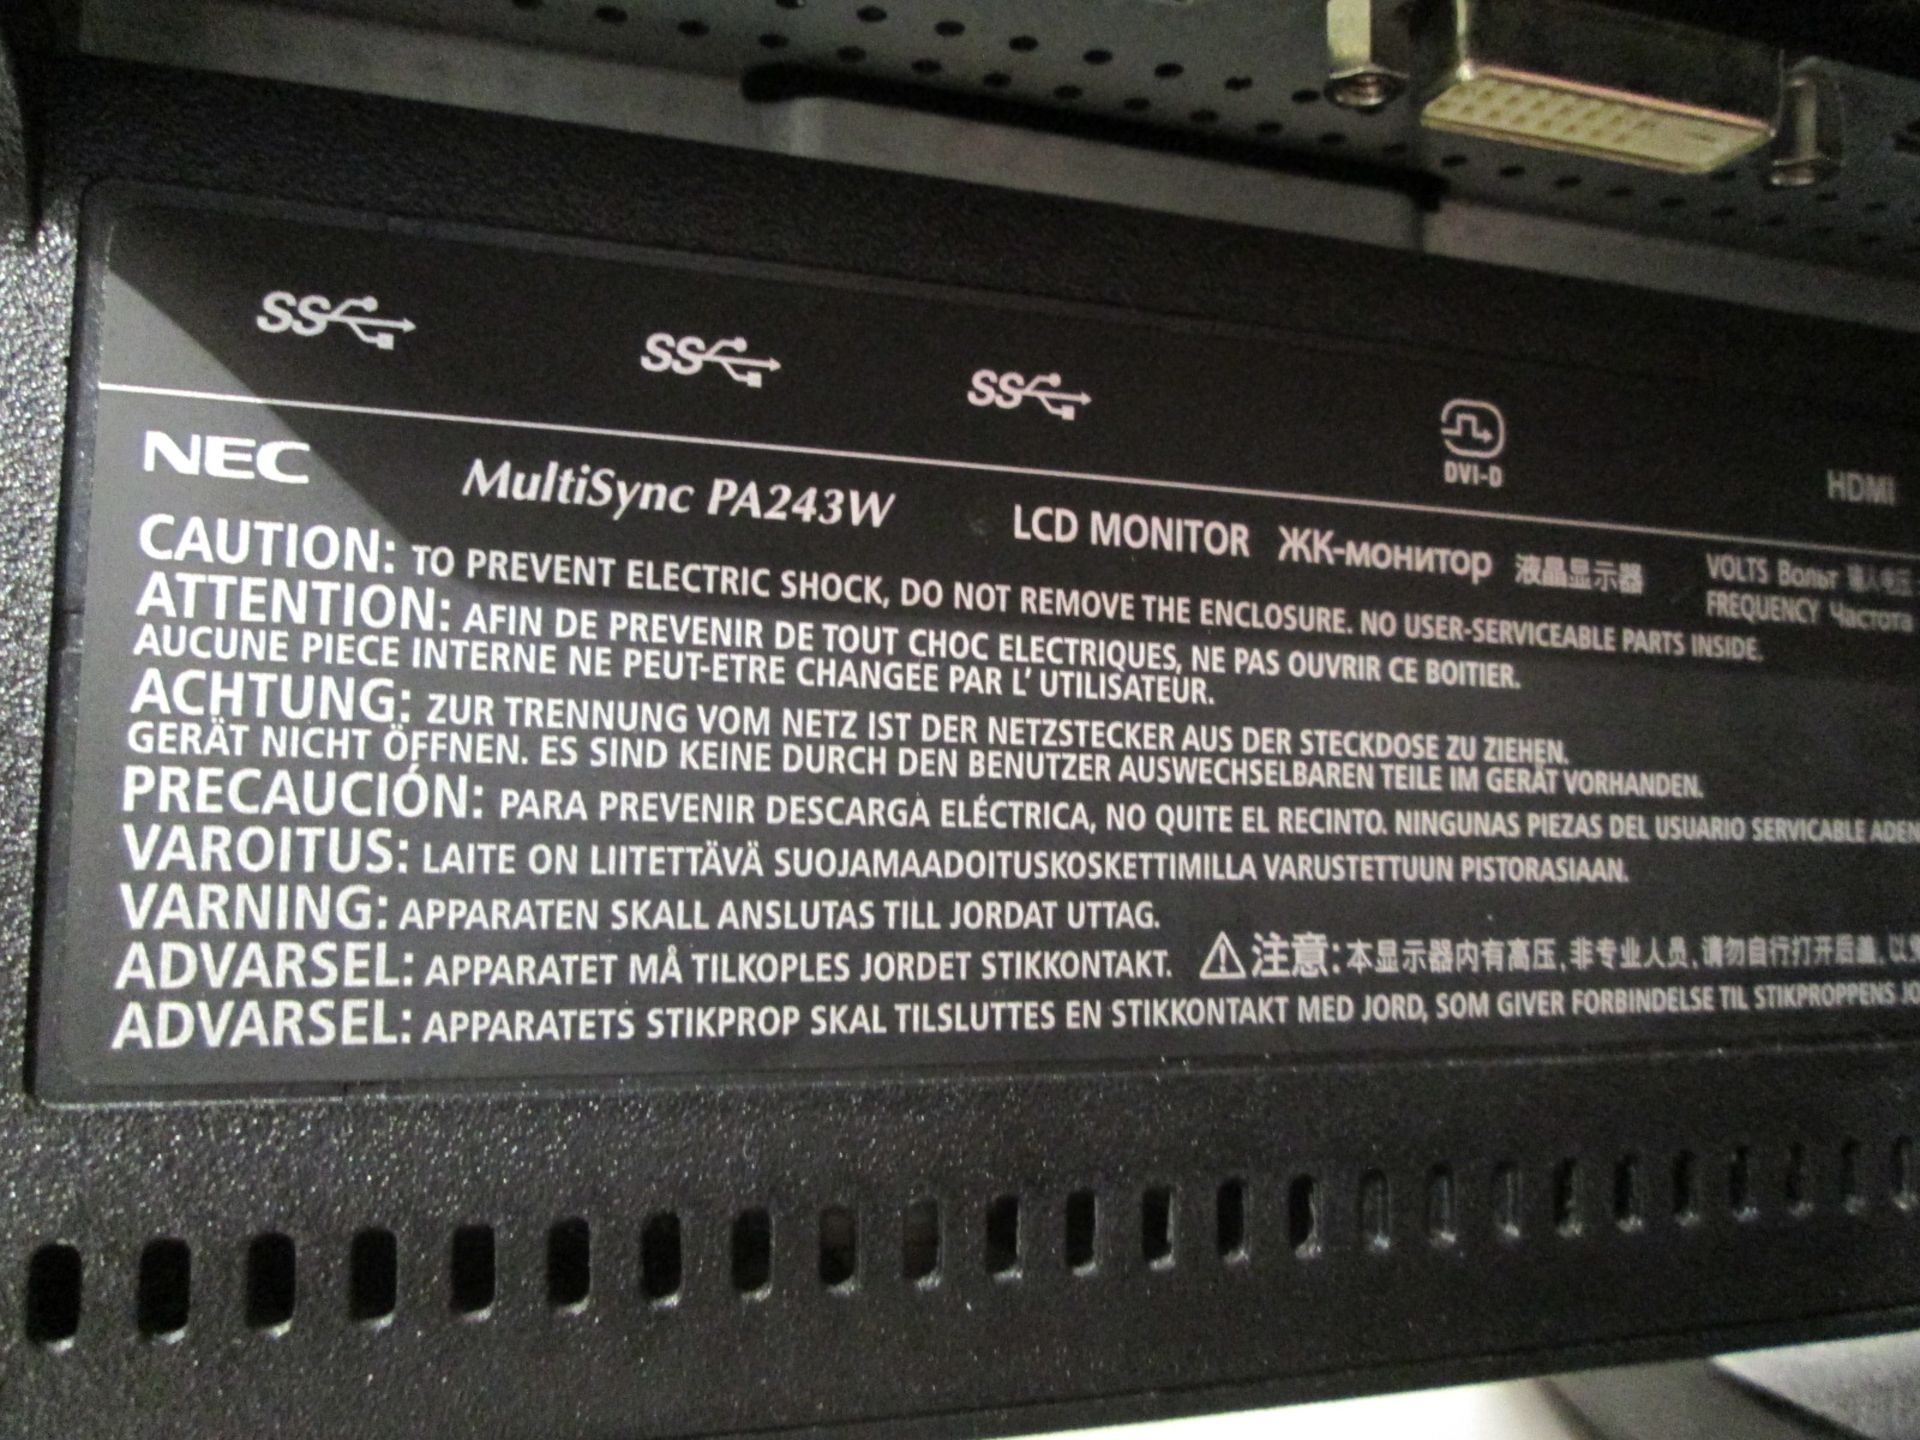 NEC PA243W 24" LCD Monitors (Qty 3) In flight cases - Image 3 of 5